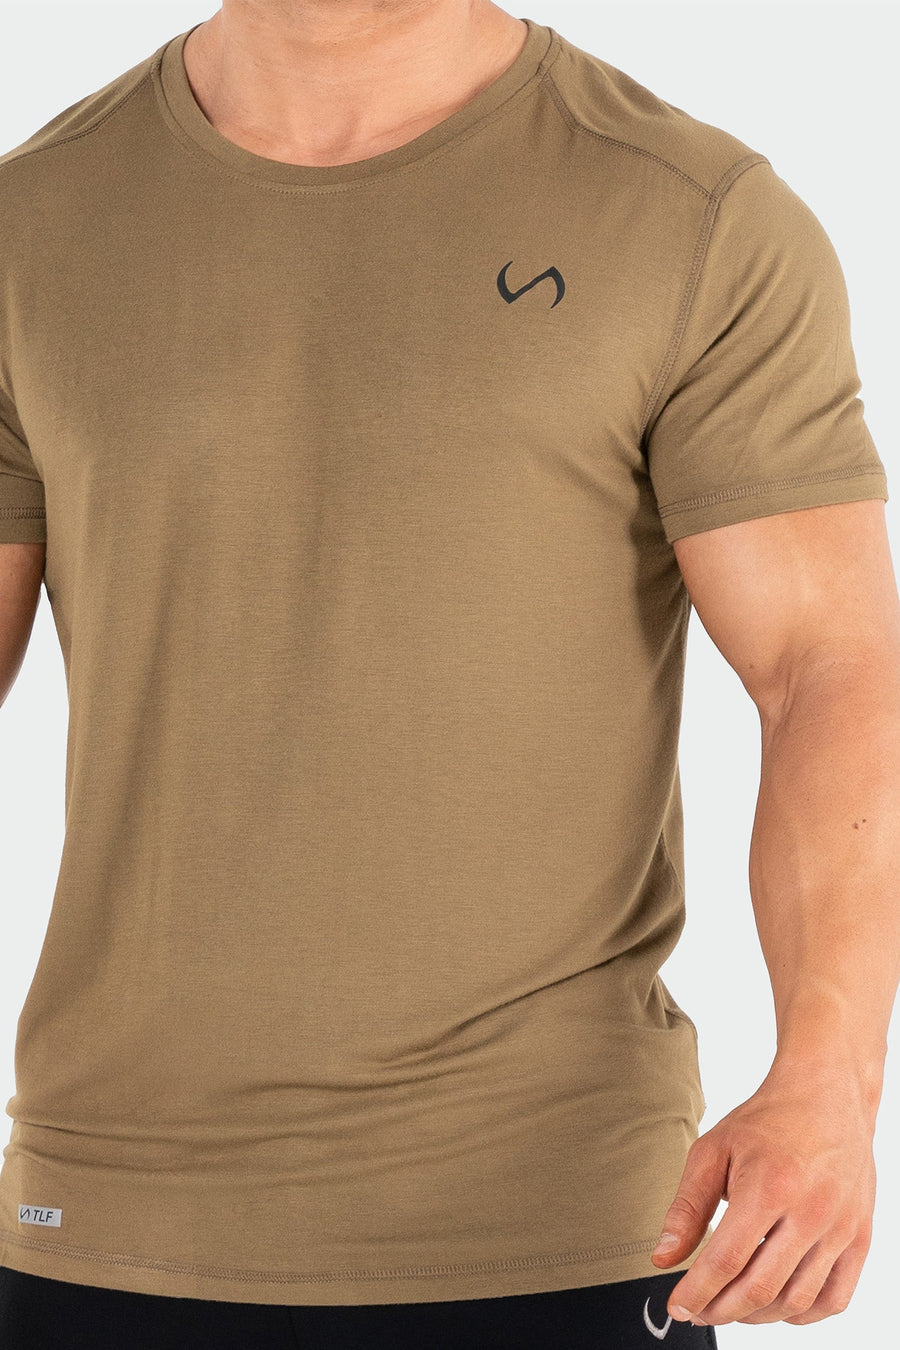 TLF Root Performance Bamboo Crew Neck - Men Short sleeves - Olive -  Green - 4